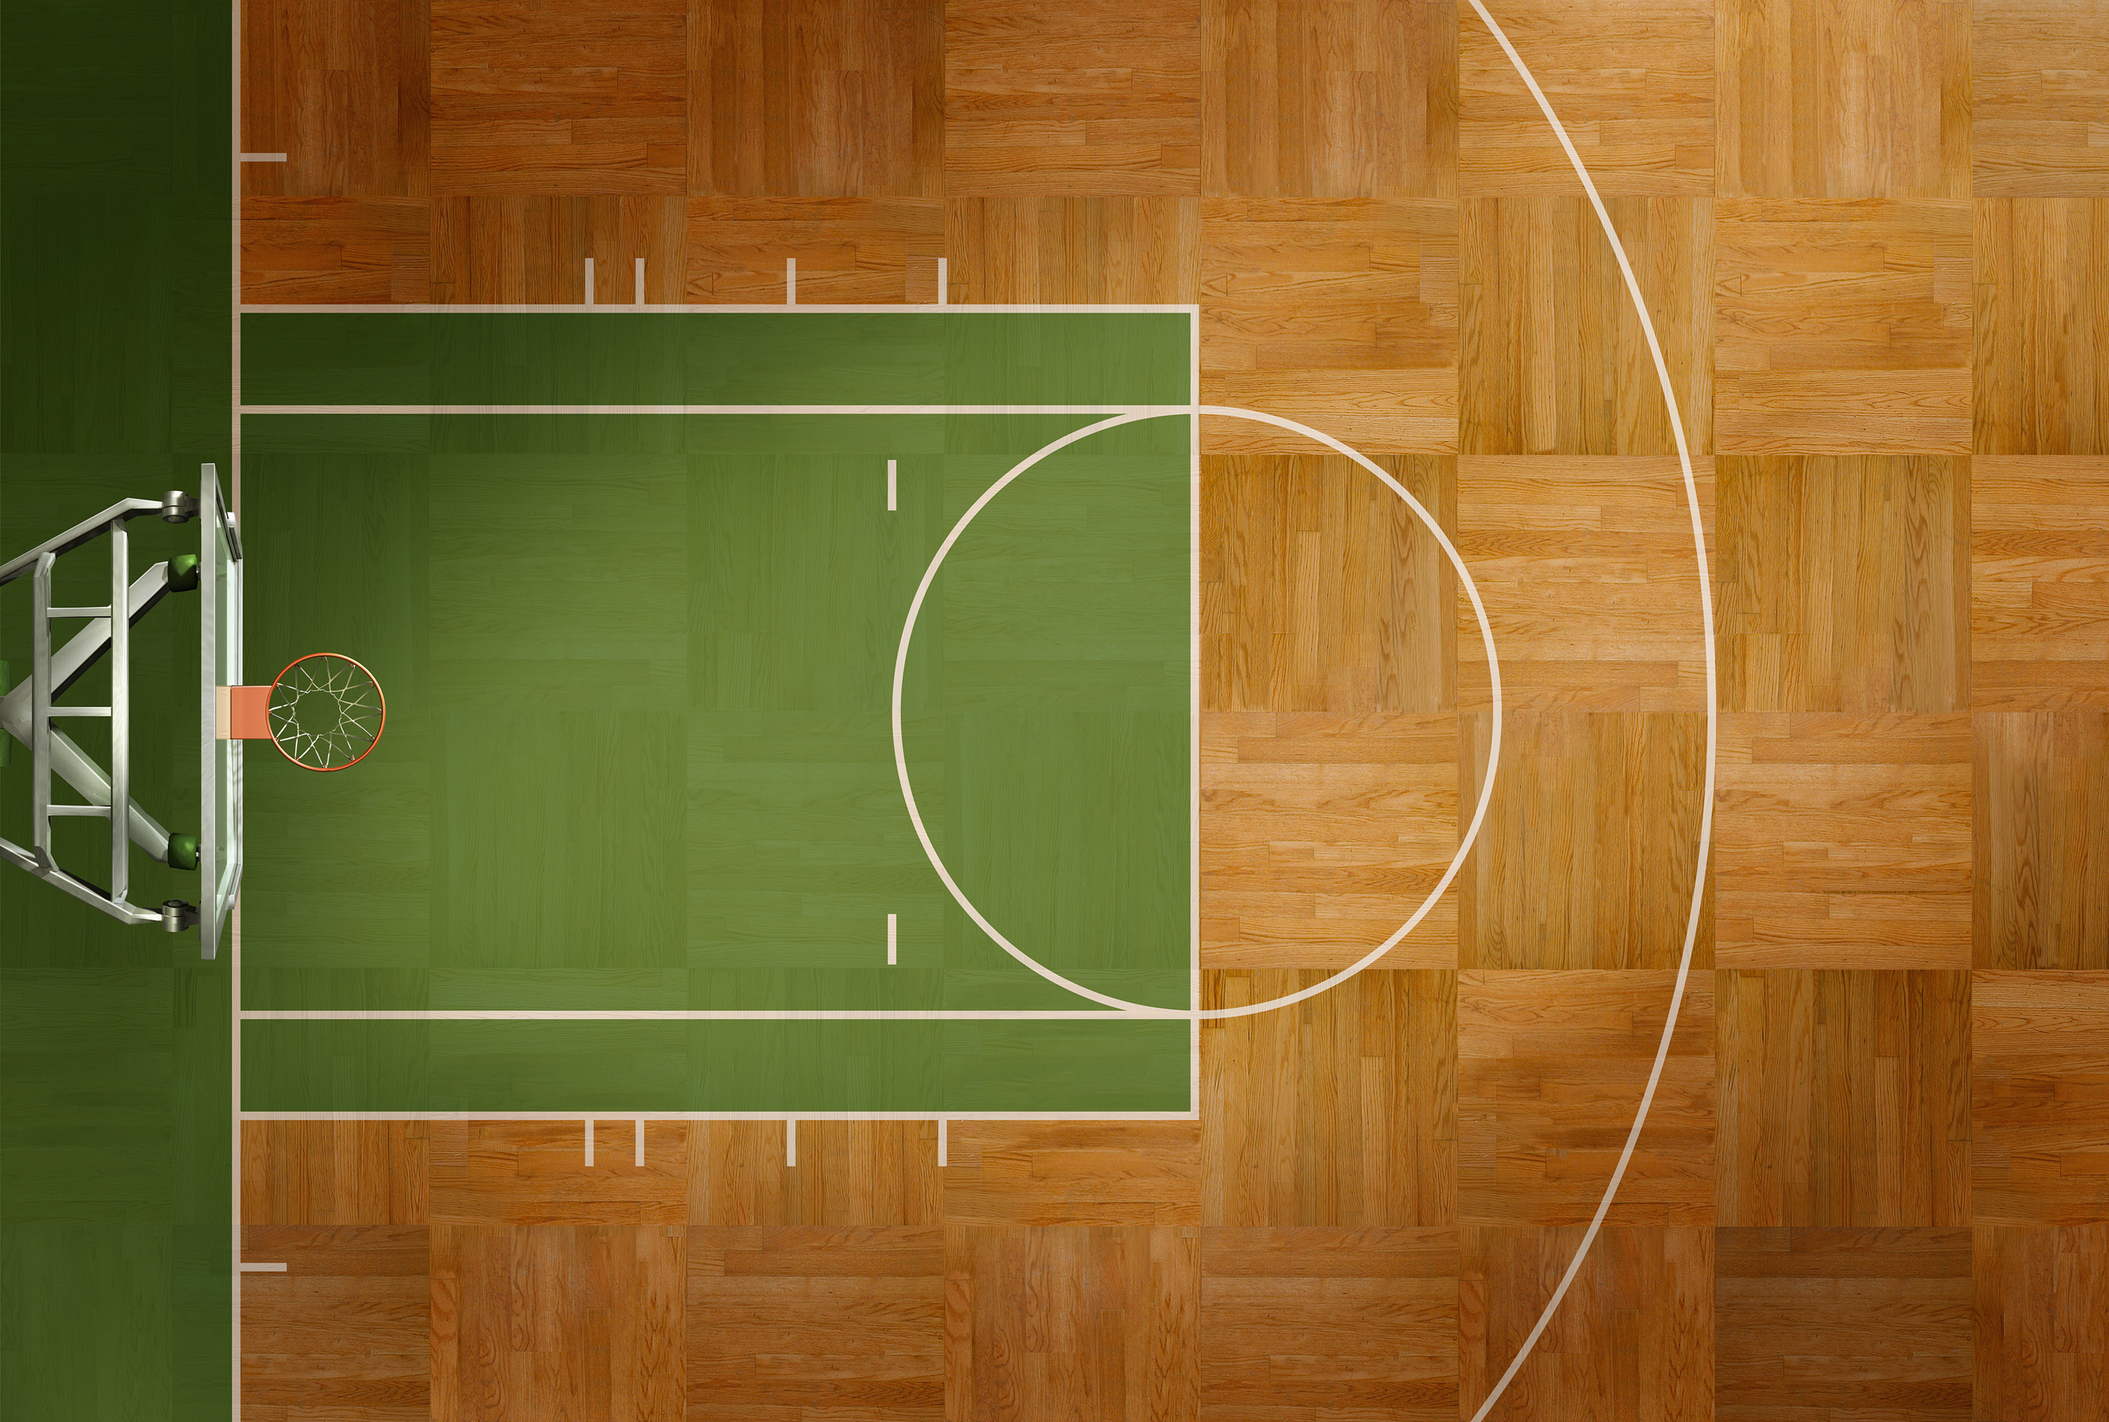 Aerial view of an empty basketball court with clear markings for boundaries and the center circle